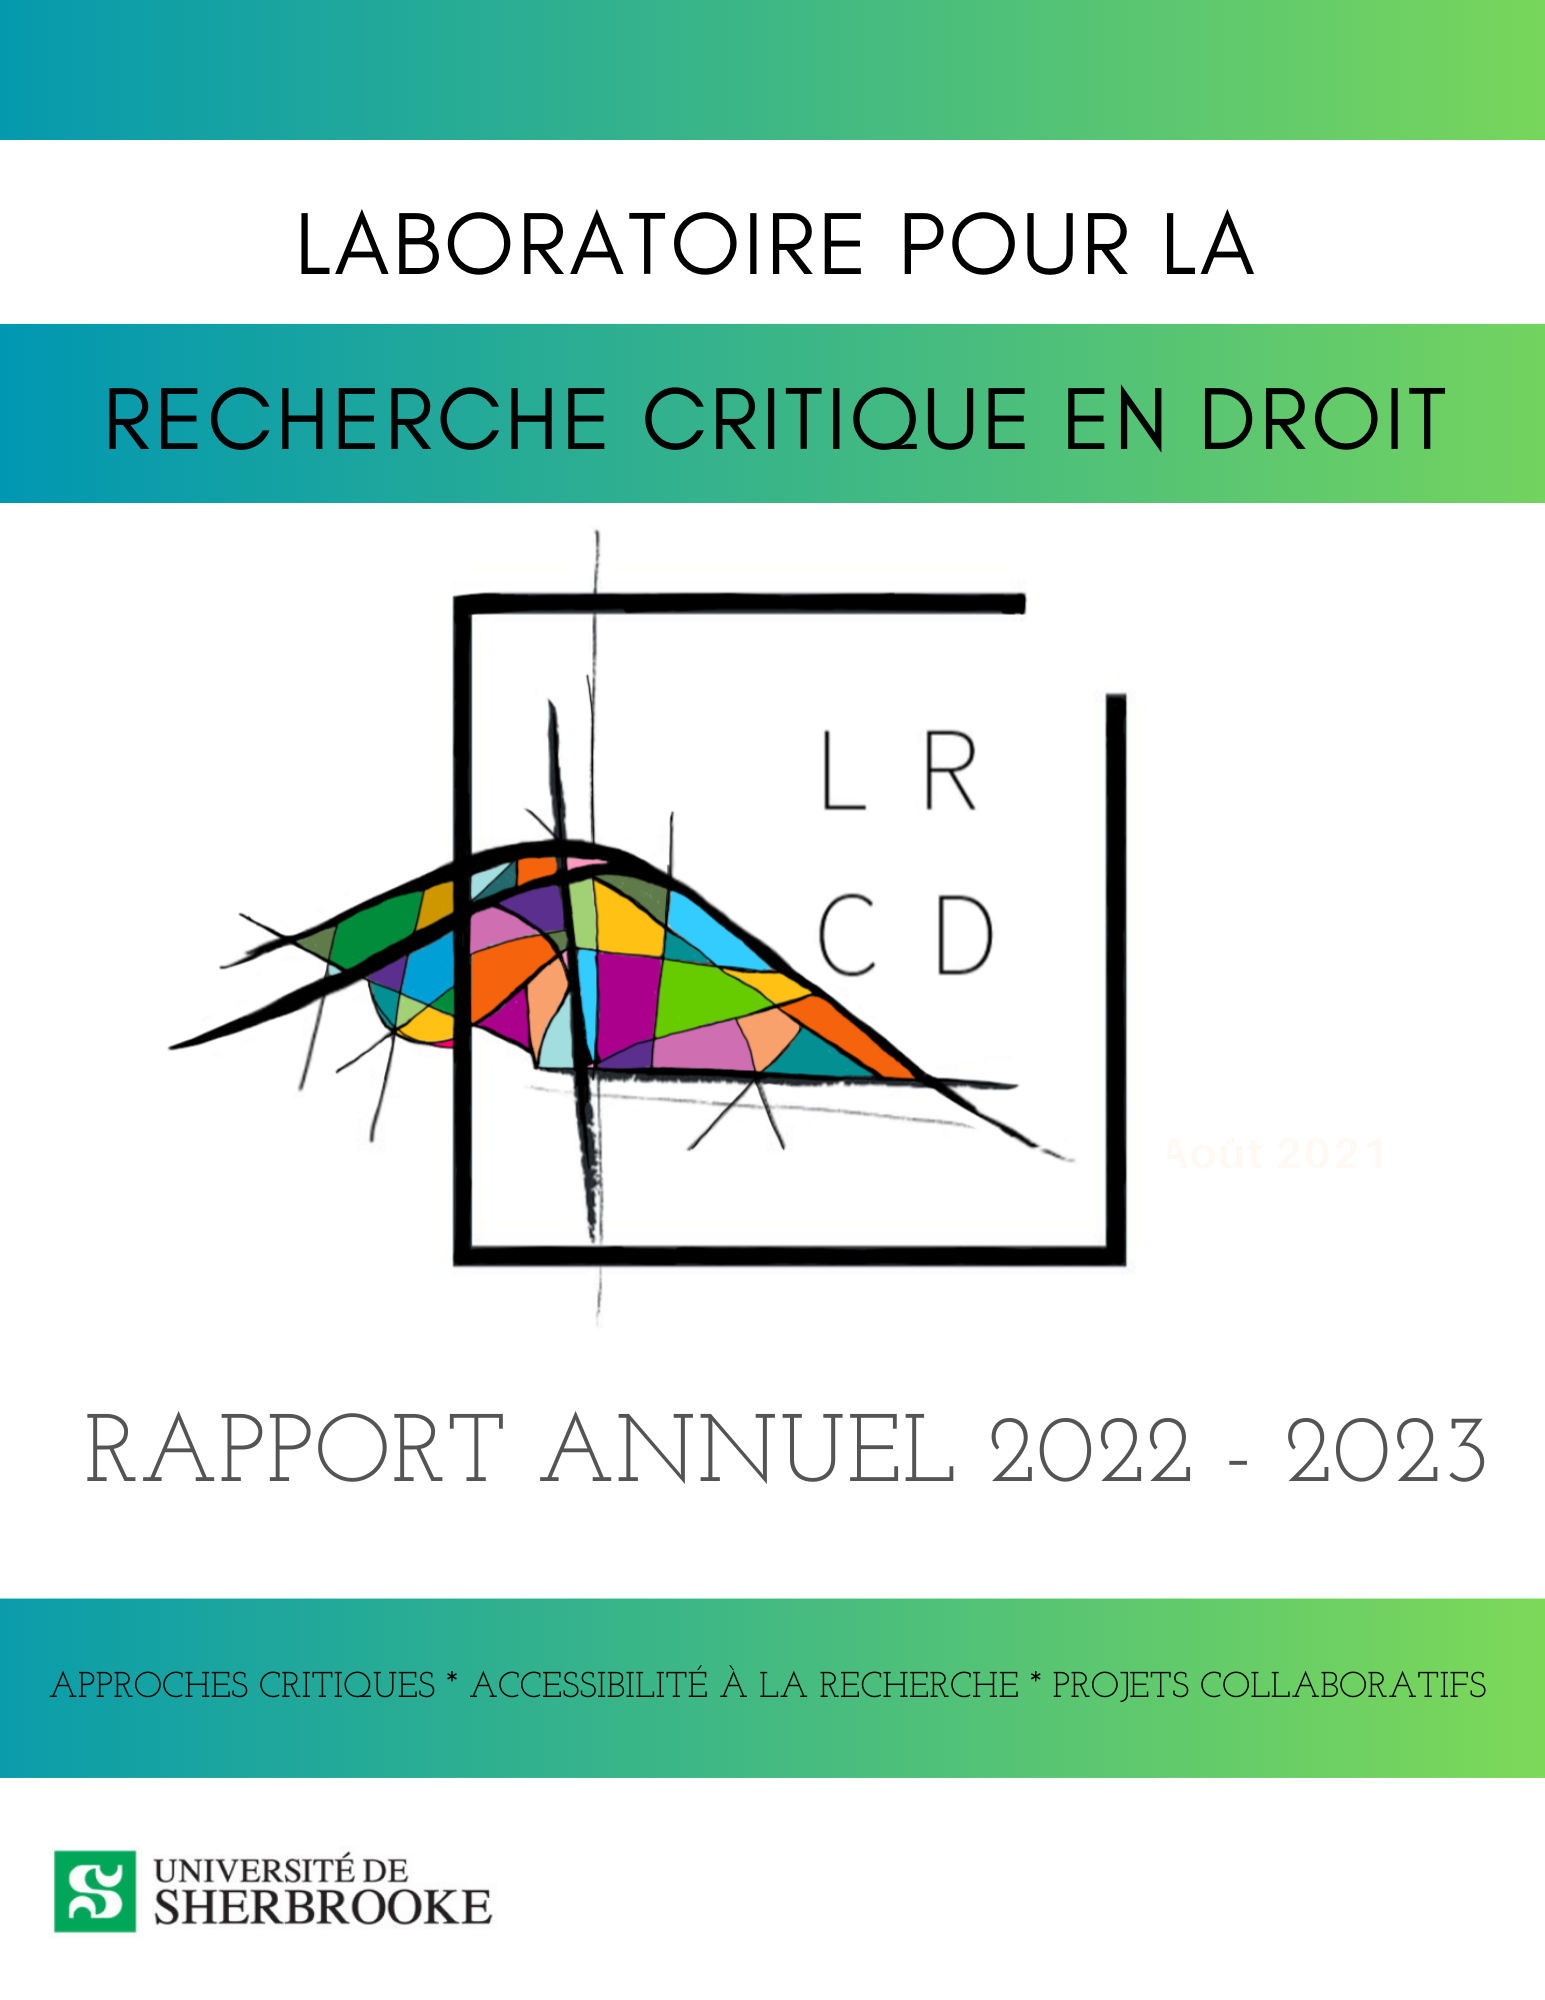 Rapport annuel - LRCD - 2022-2023.png